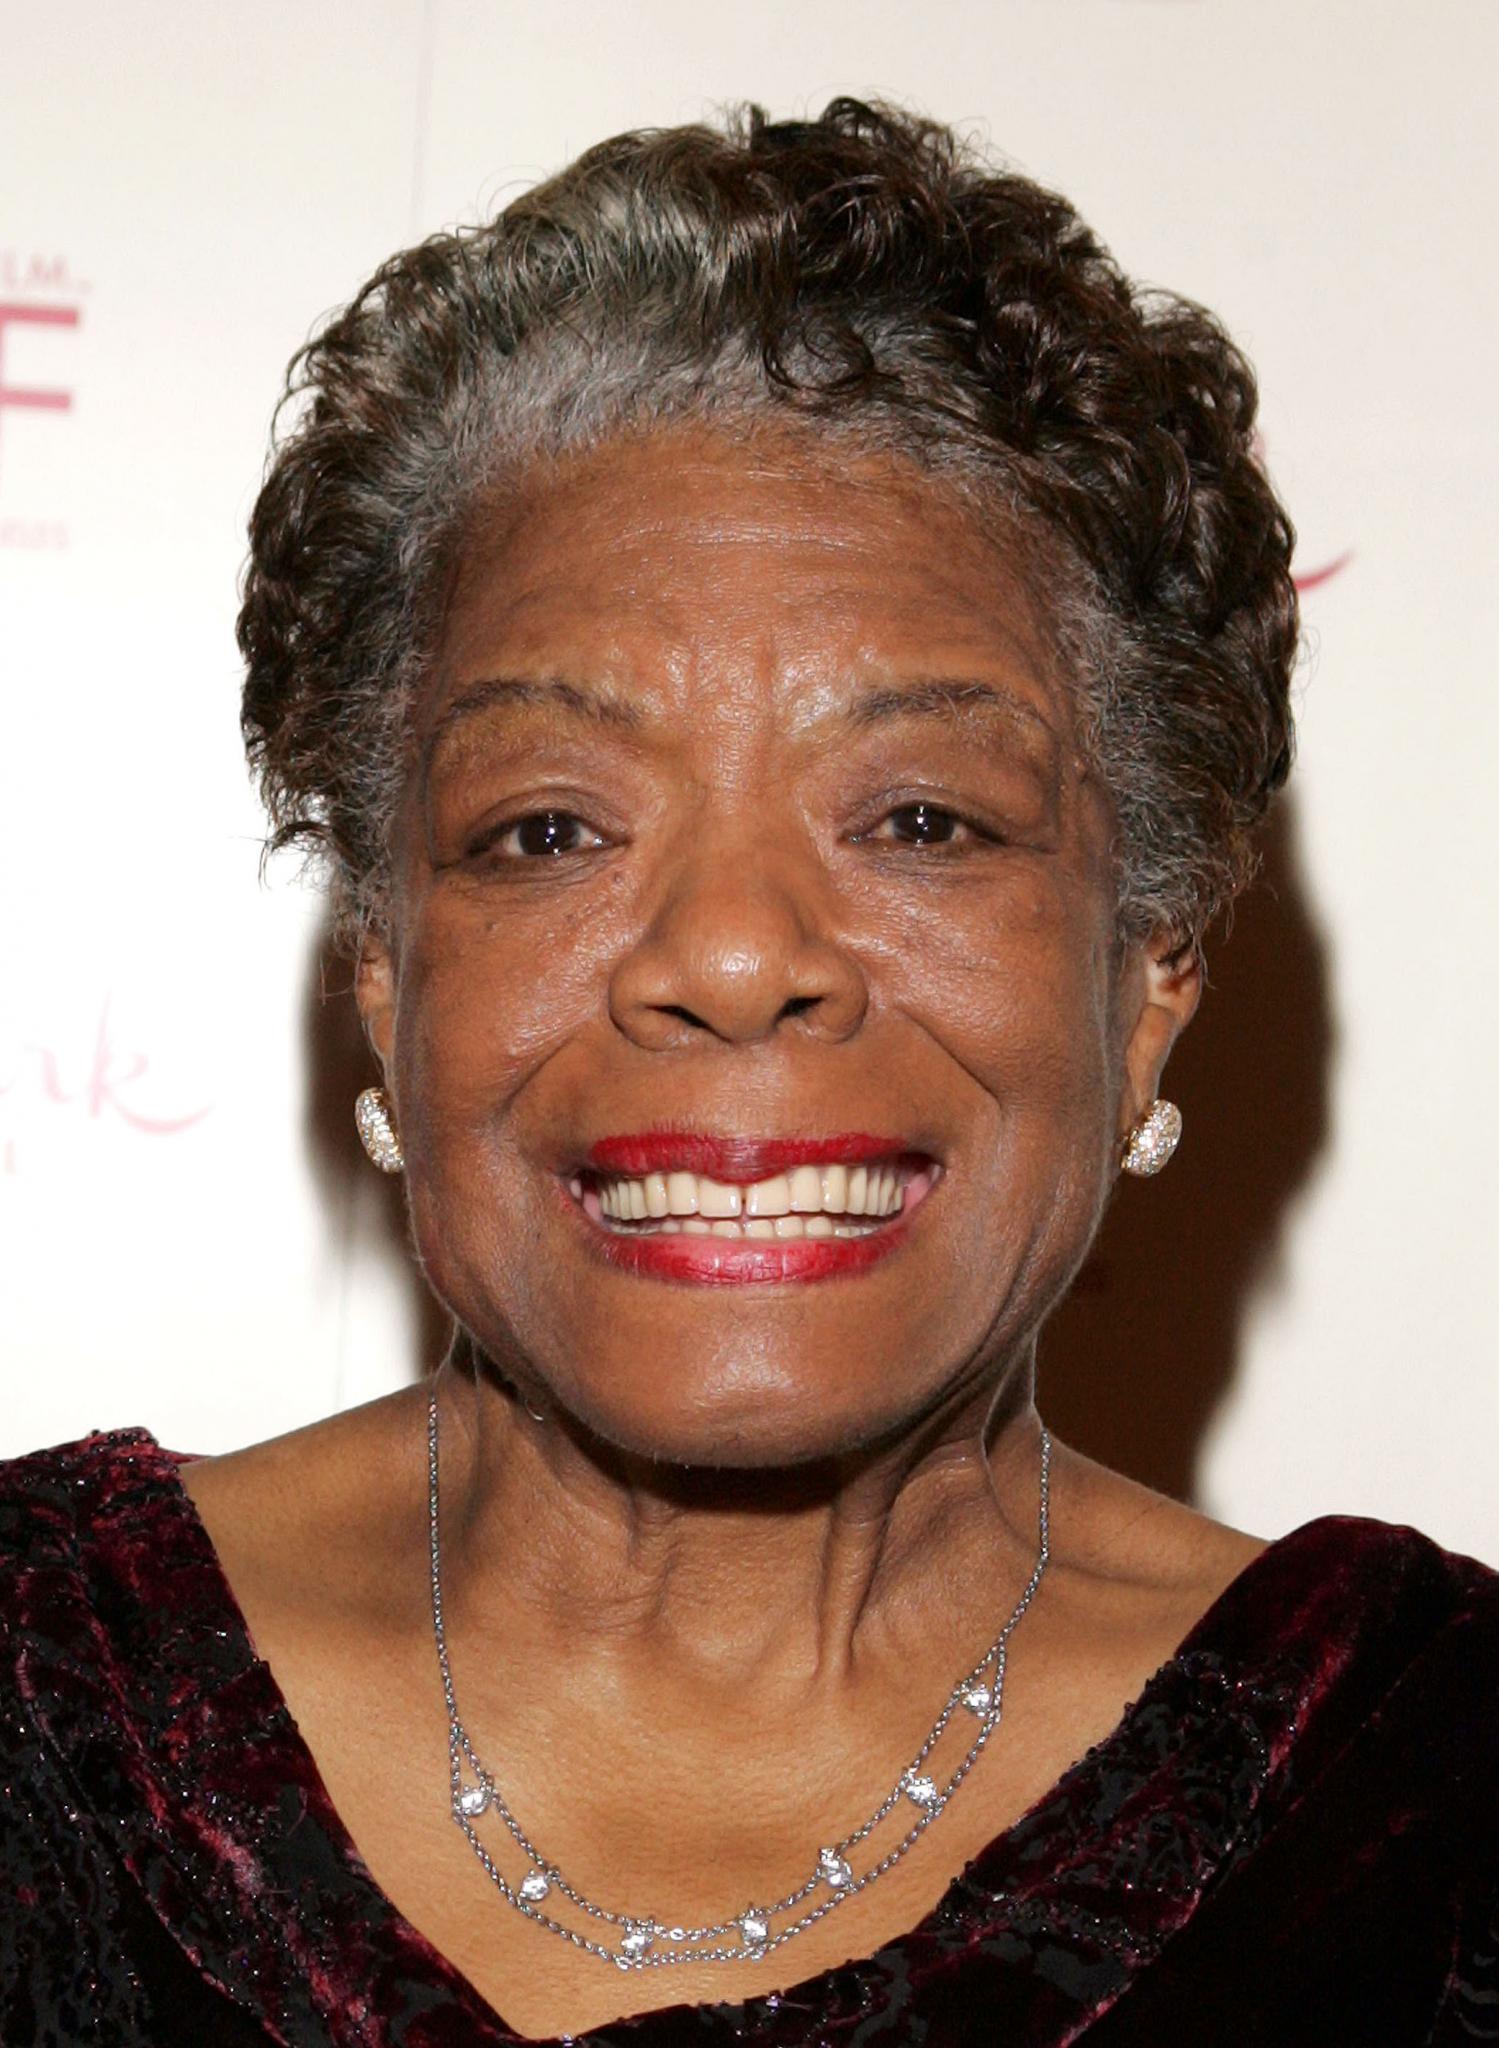 Maya Angelou's Life Story Is Coming To Broadway In 2021